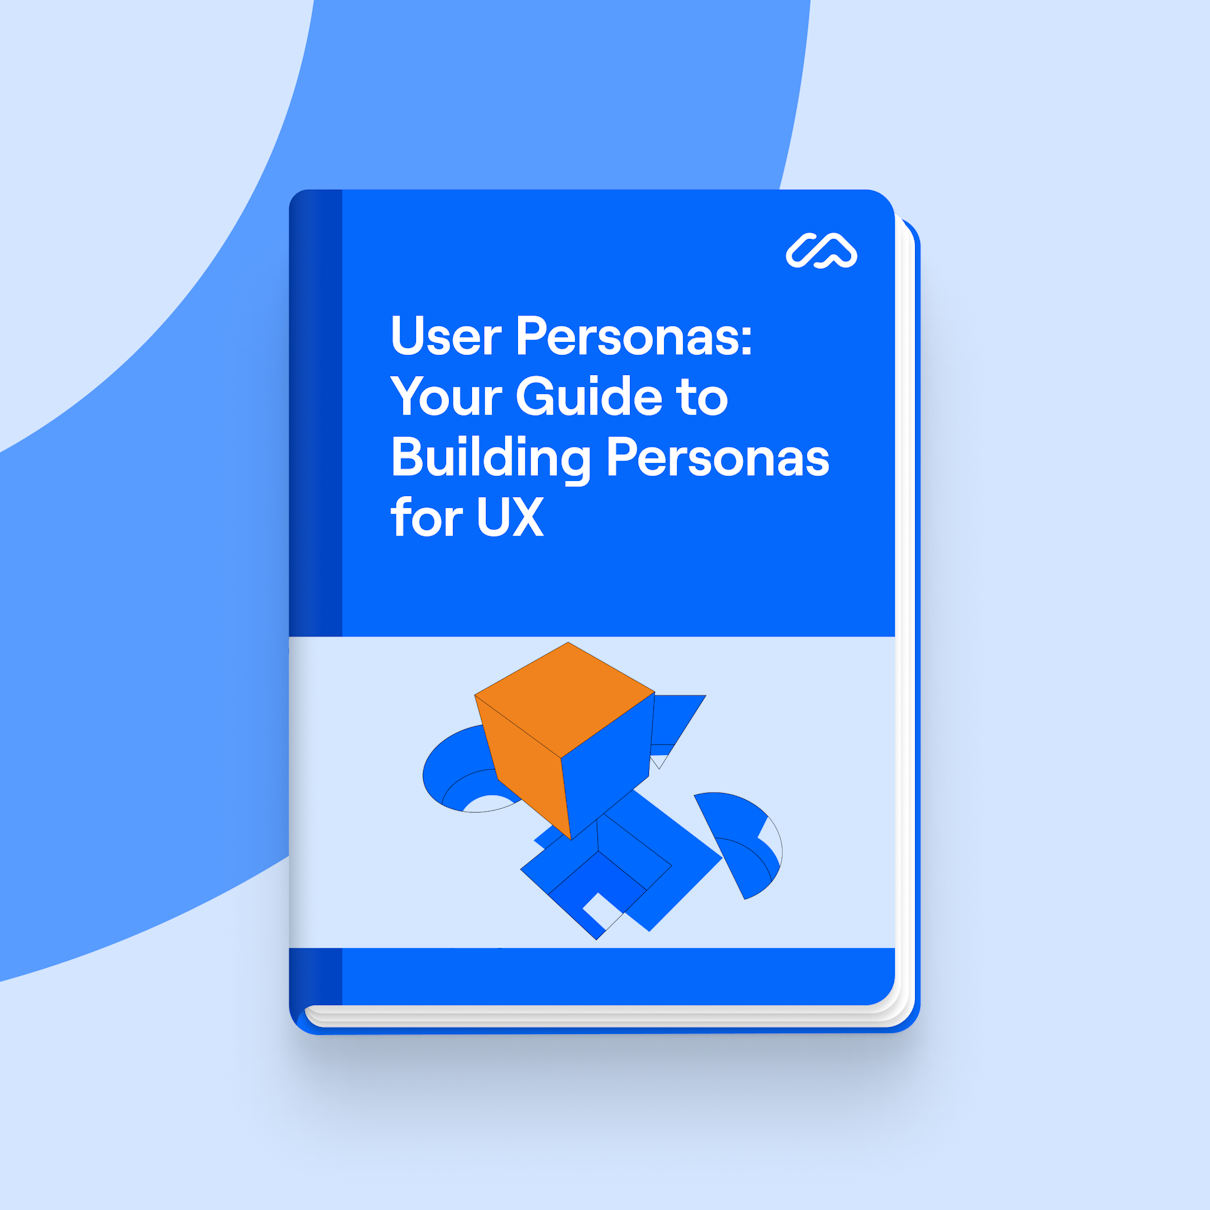 User Personas: Your Guide to Building Personas for UX